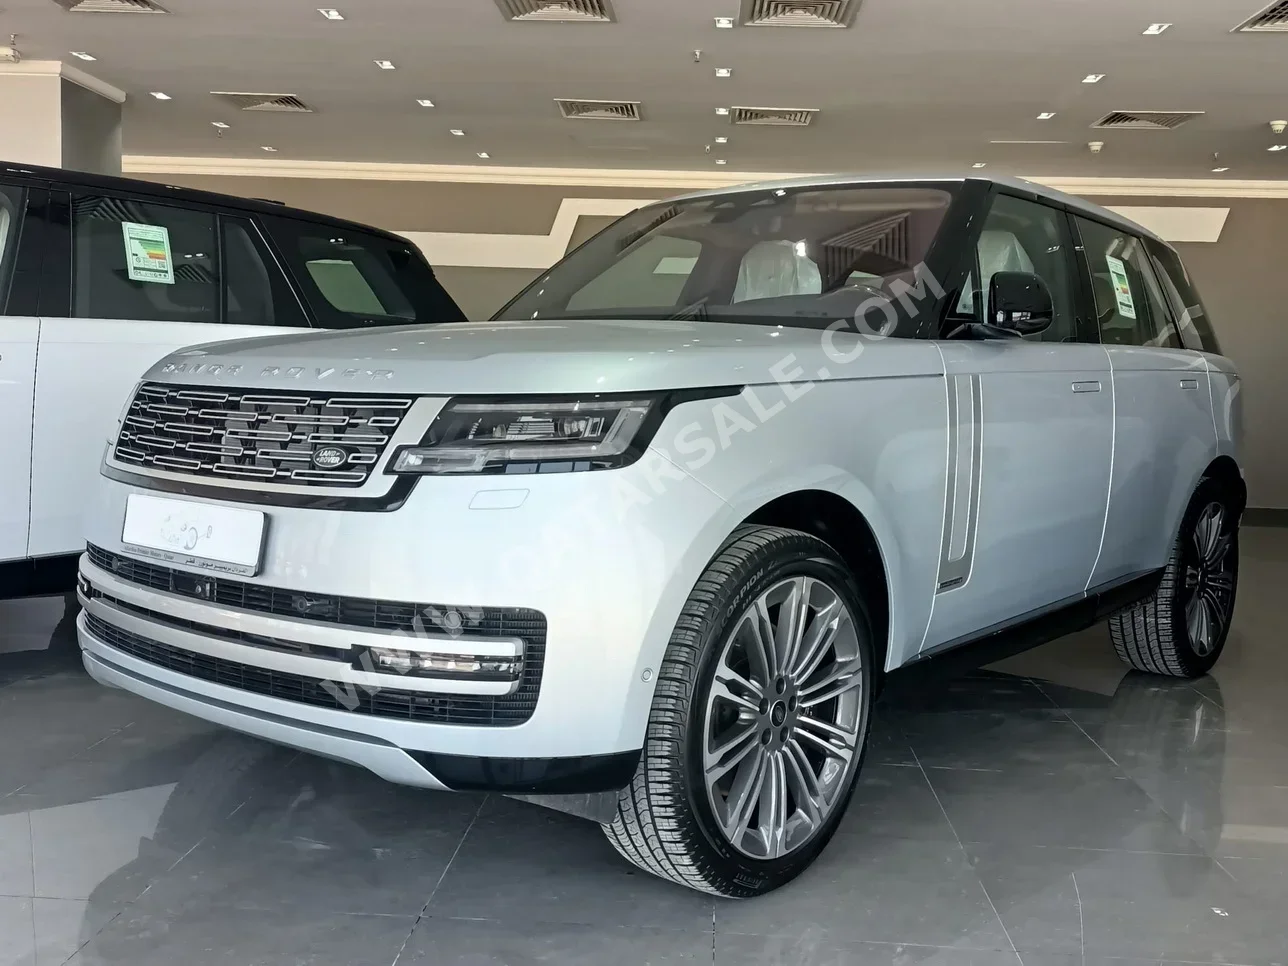  Land Rover  Range Rover  Vogue  Autobiography  2023  Automatic  0 Km  8 Cylinder  Four Wheel Drive (4WD)  SUV  Silver  With Warranty